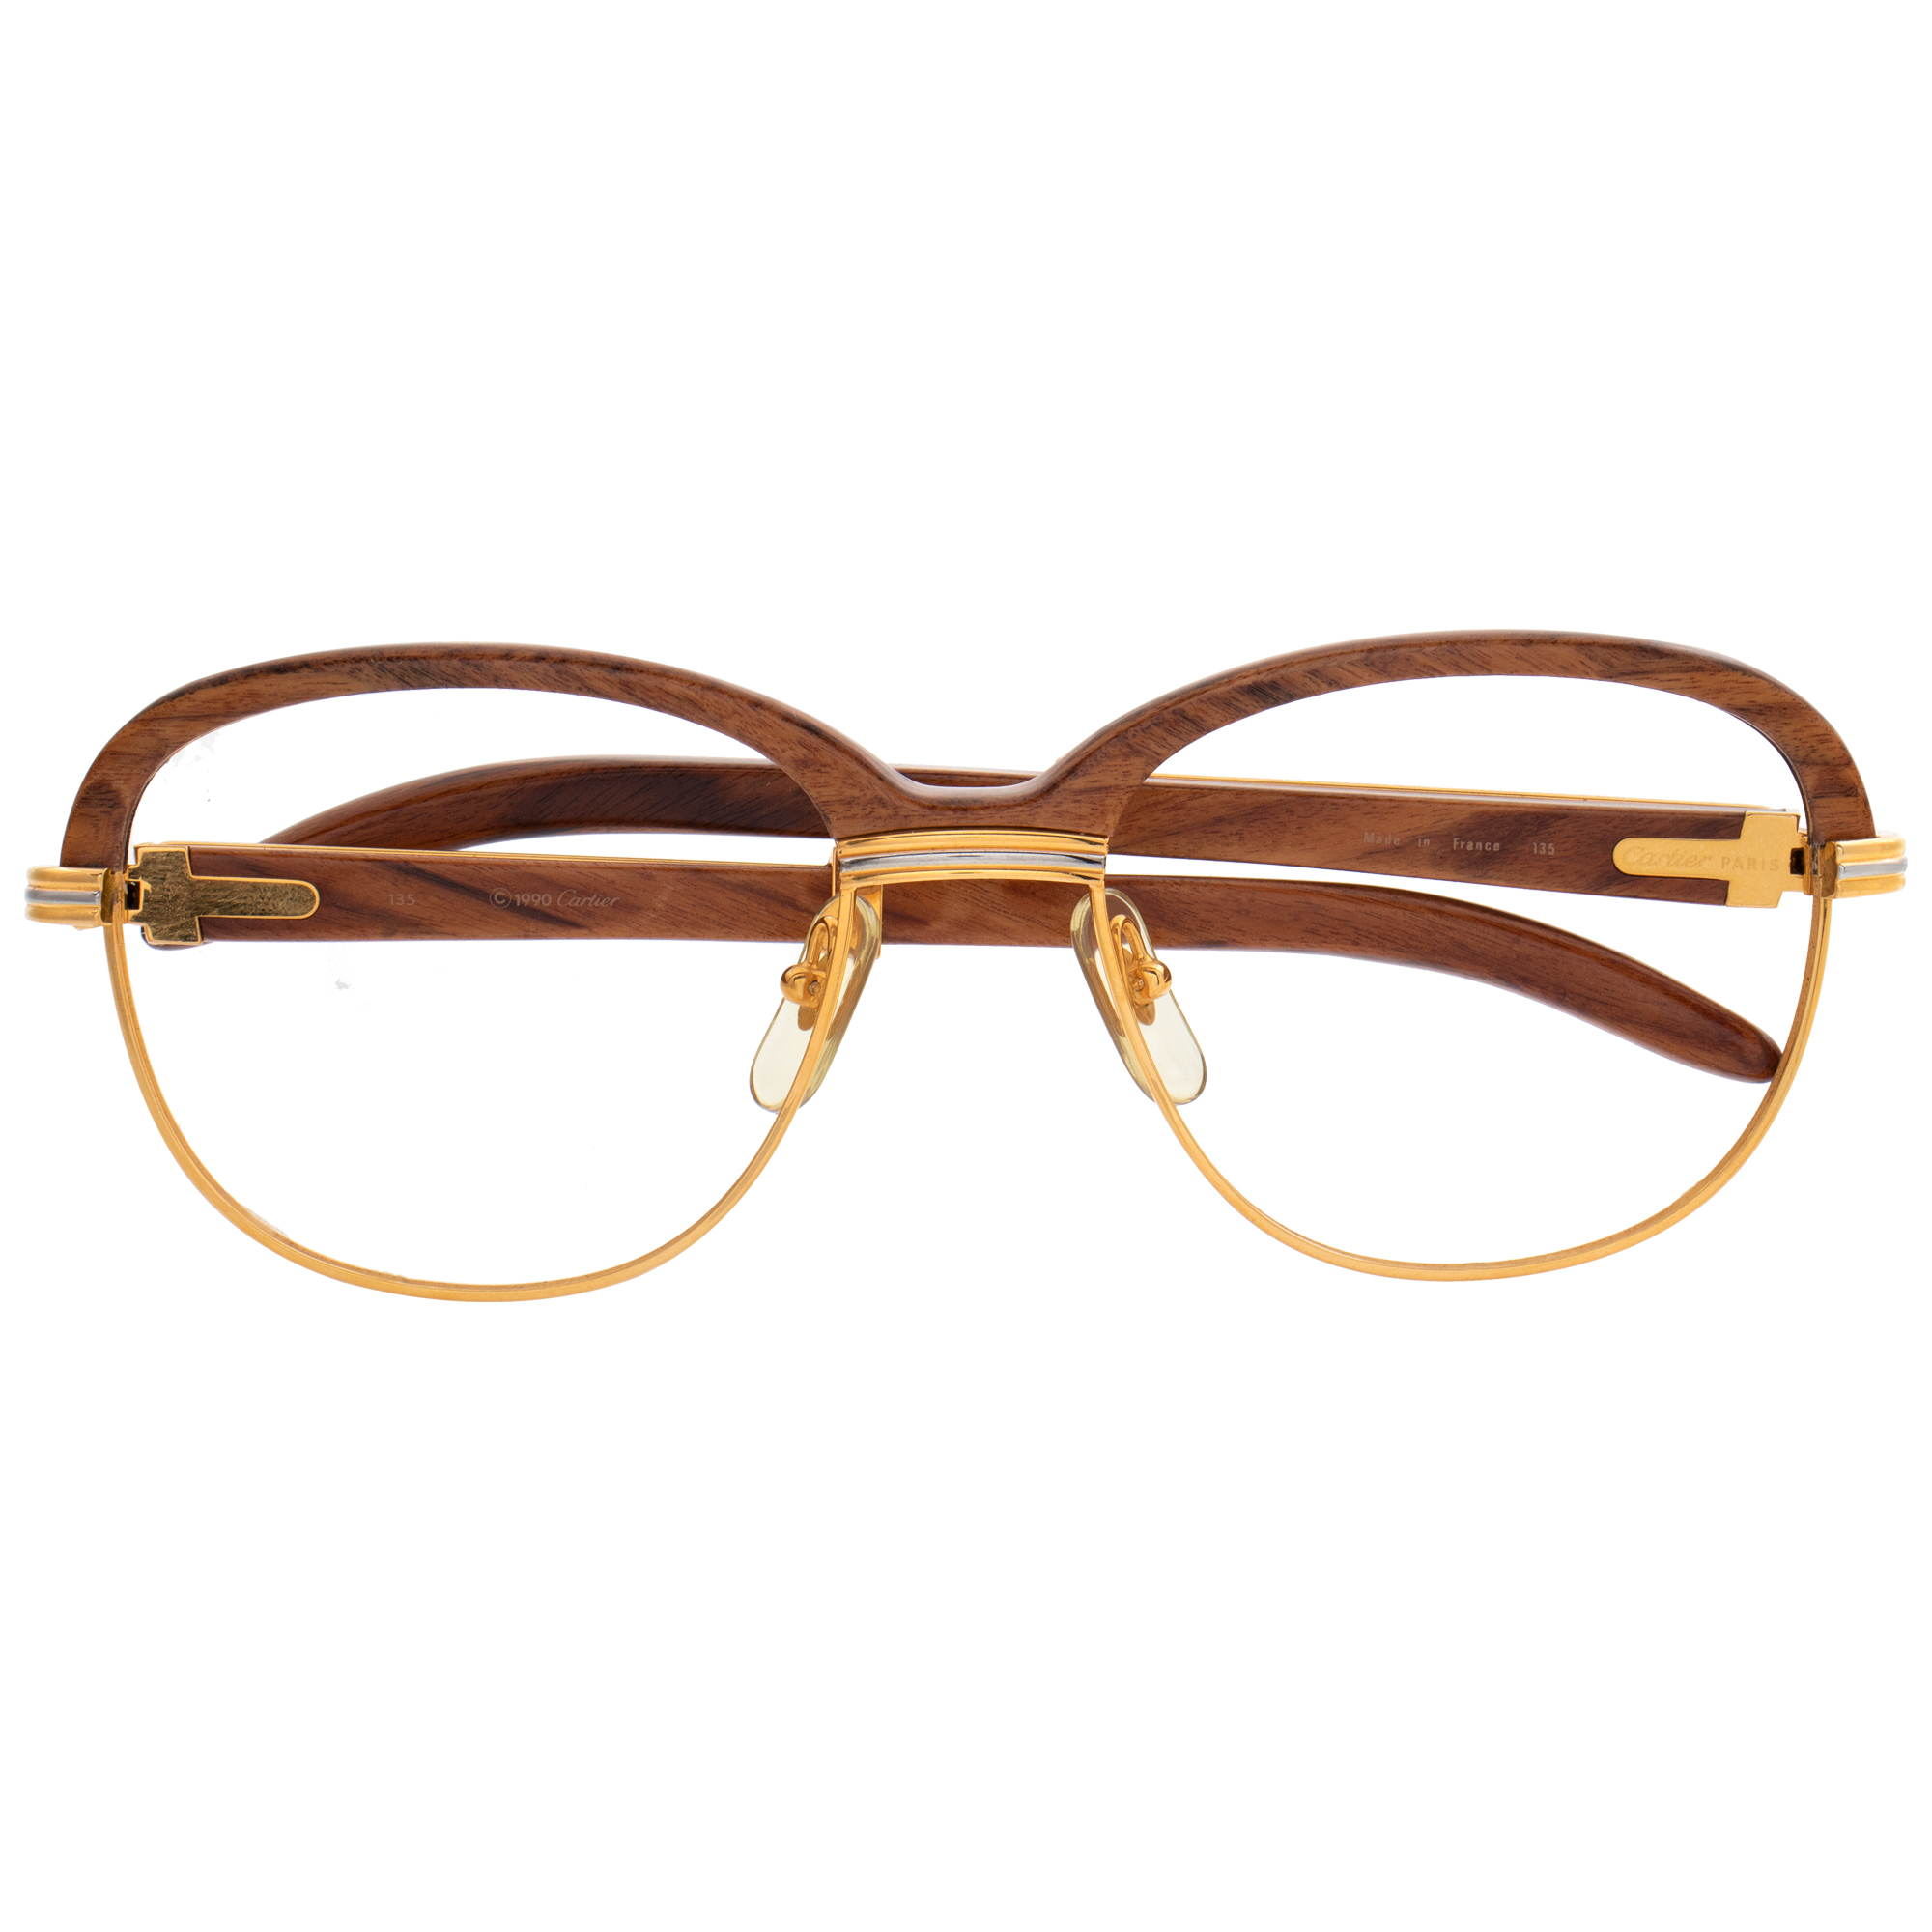 Cartier "Malmaison" collection, Palisander Rosewood & gold glasses. Circa 1990 image 5